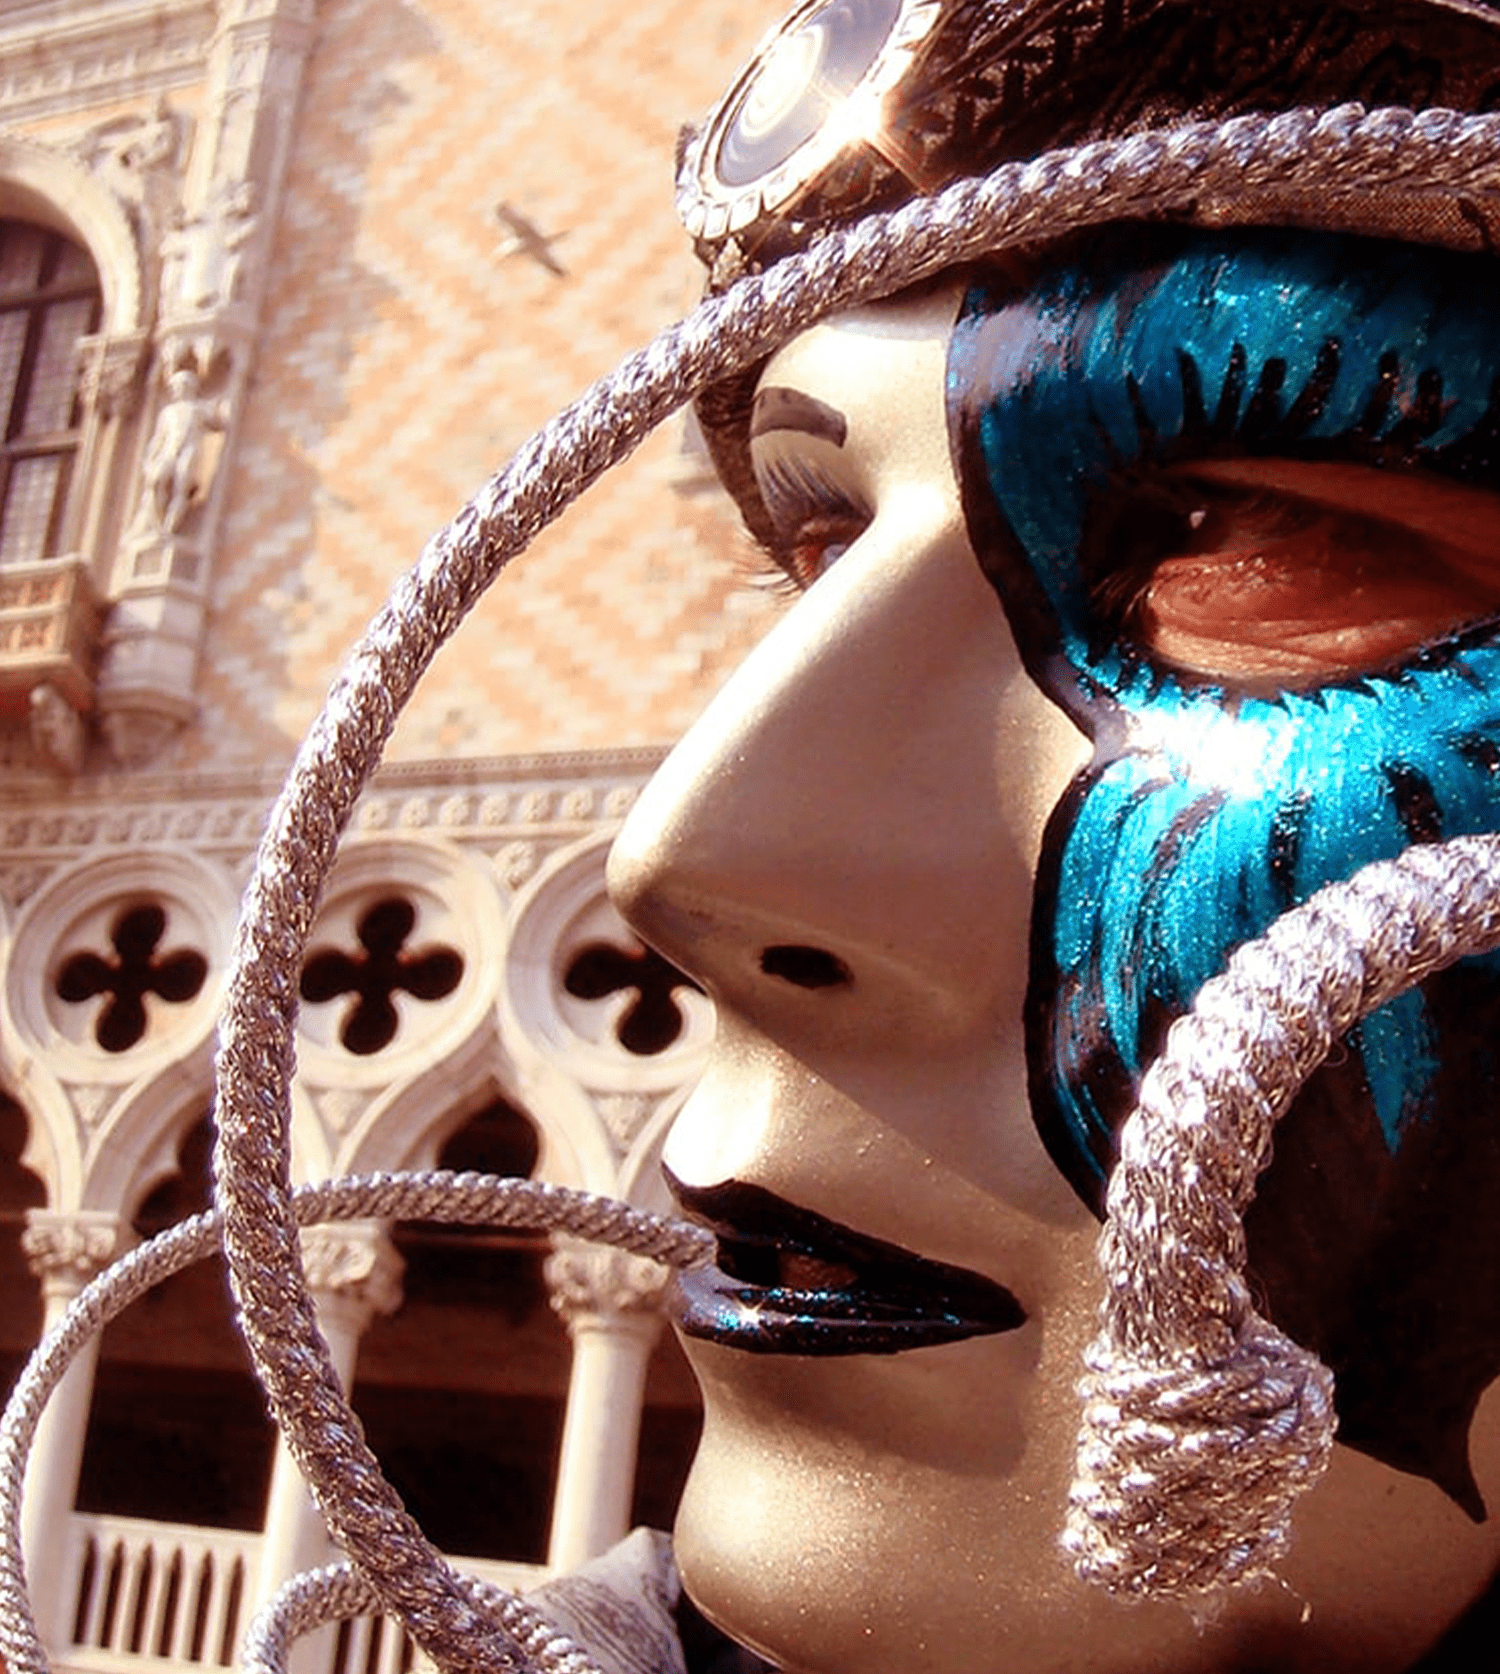 At Carnevale, Anything Goes: Embracing the Spirit of Italian Tradition and Joy